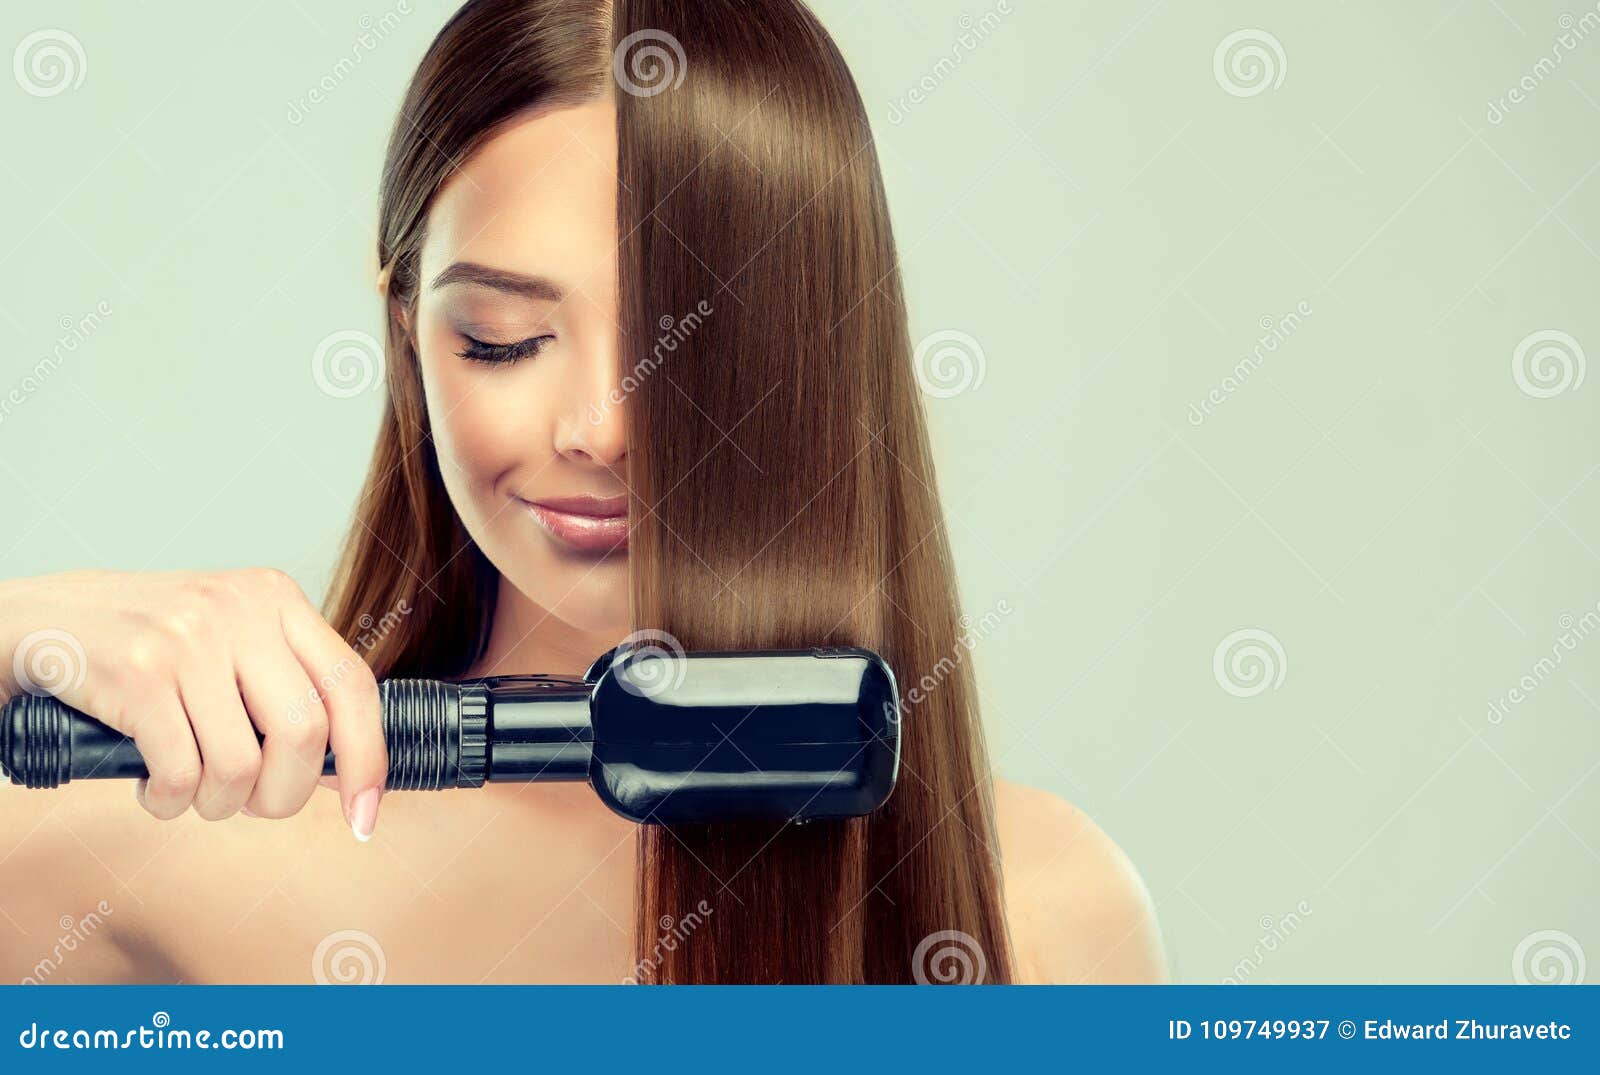 Young Woman is Demonstrating Process of Hair Straightening. Stock Image -  Image of cosmetology, elegance: 109749937